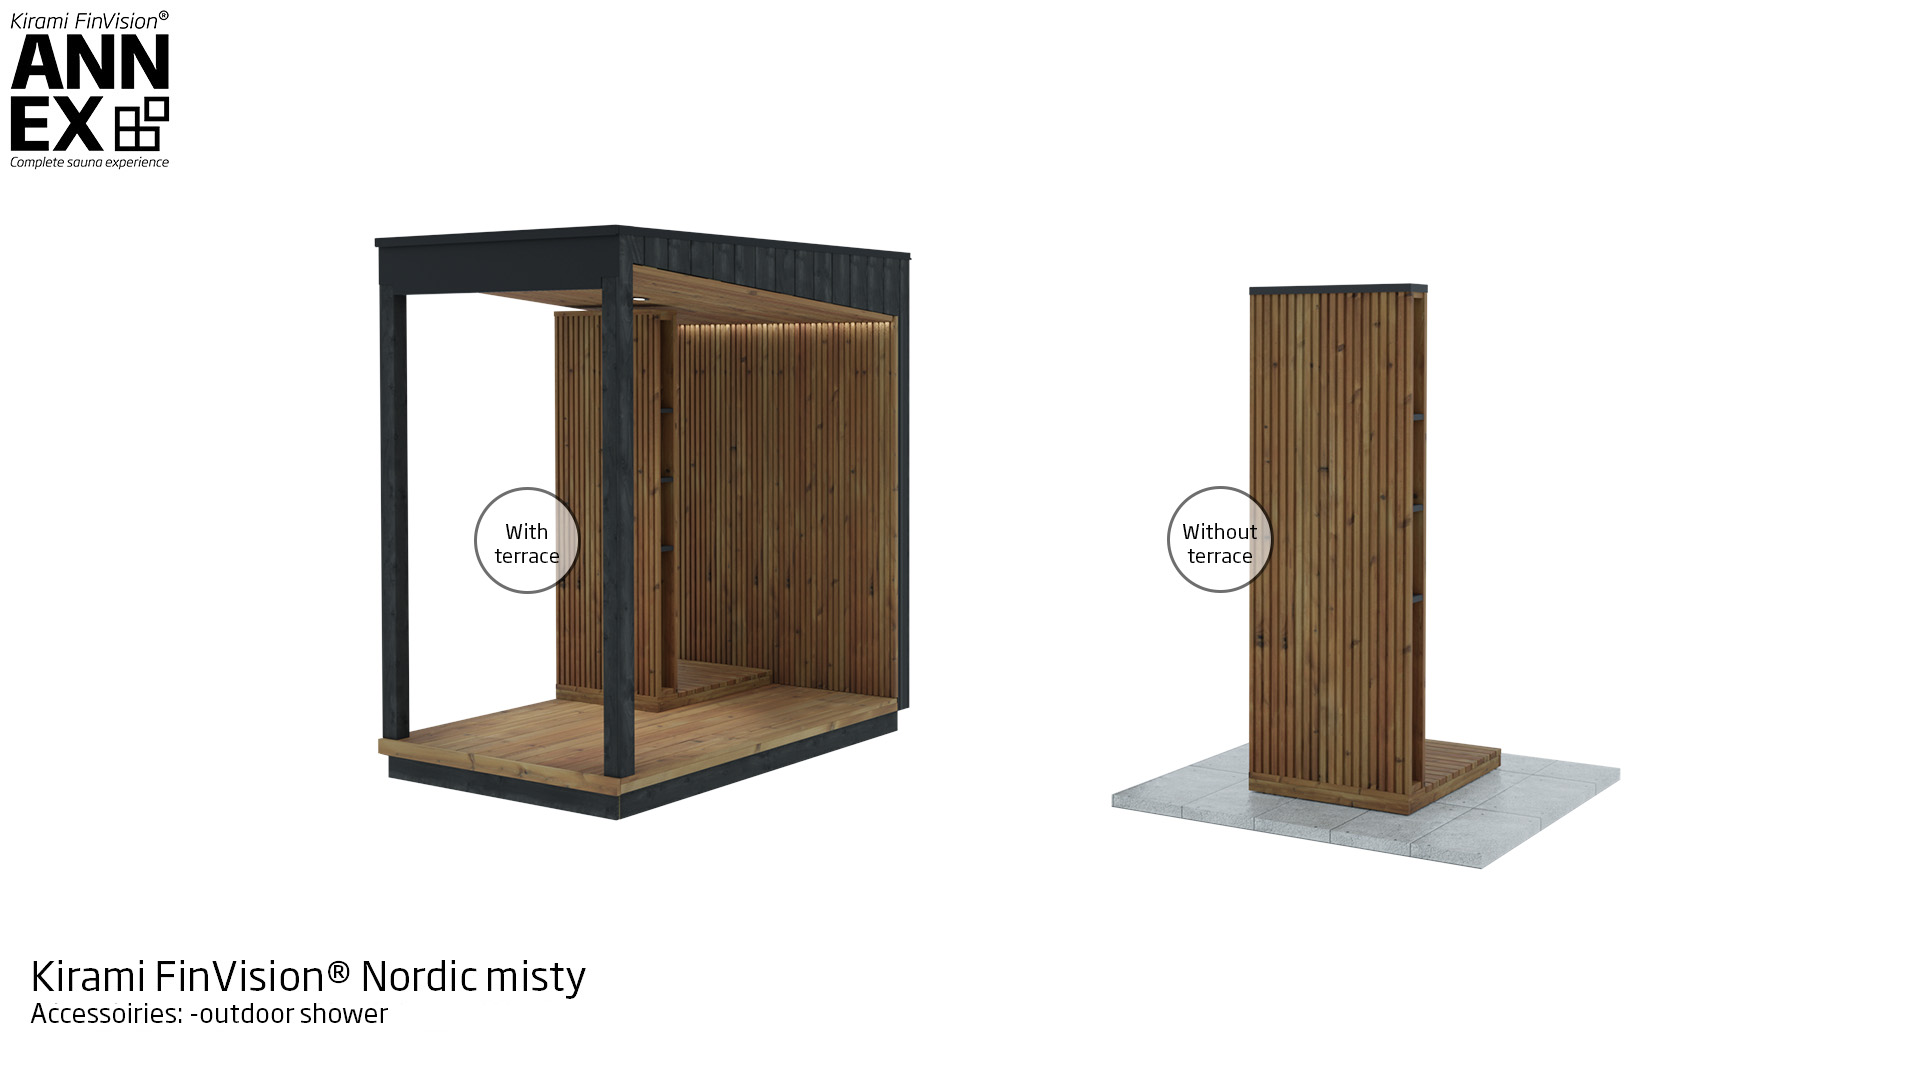 Kirami FinVision® Nordic misty,  - outdoor shower modules, terrace and without terrace module